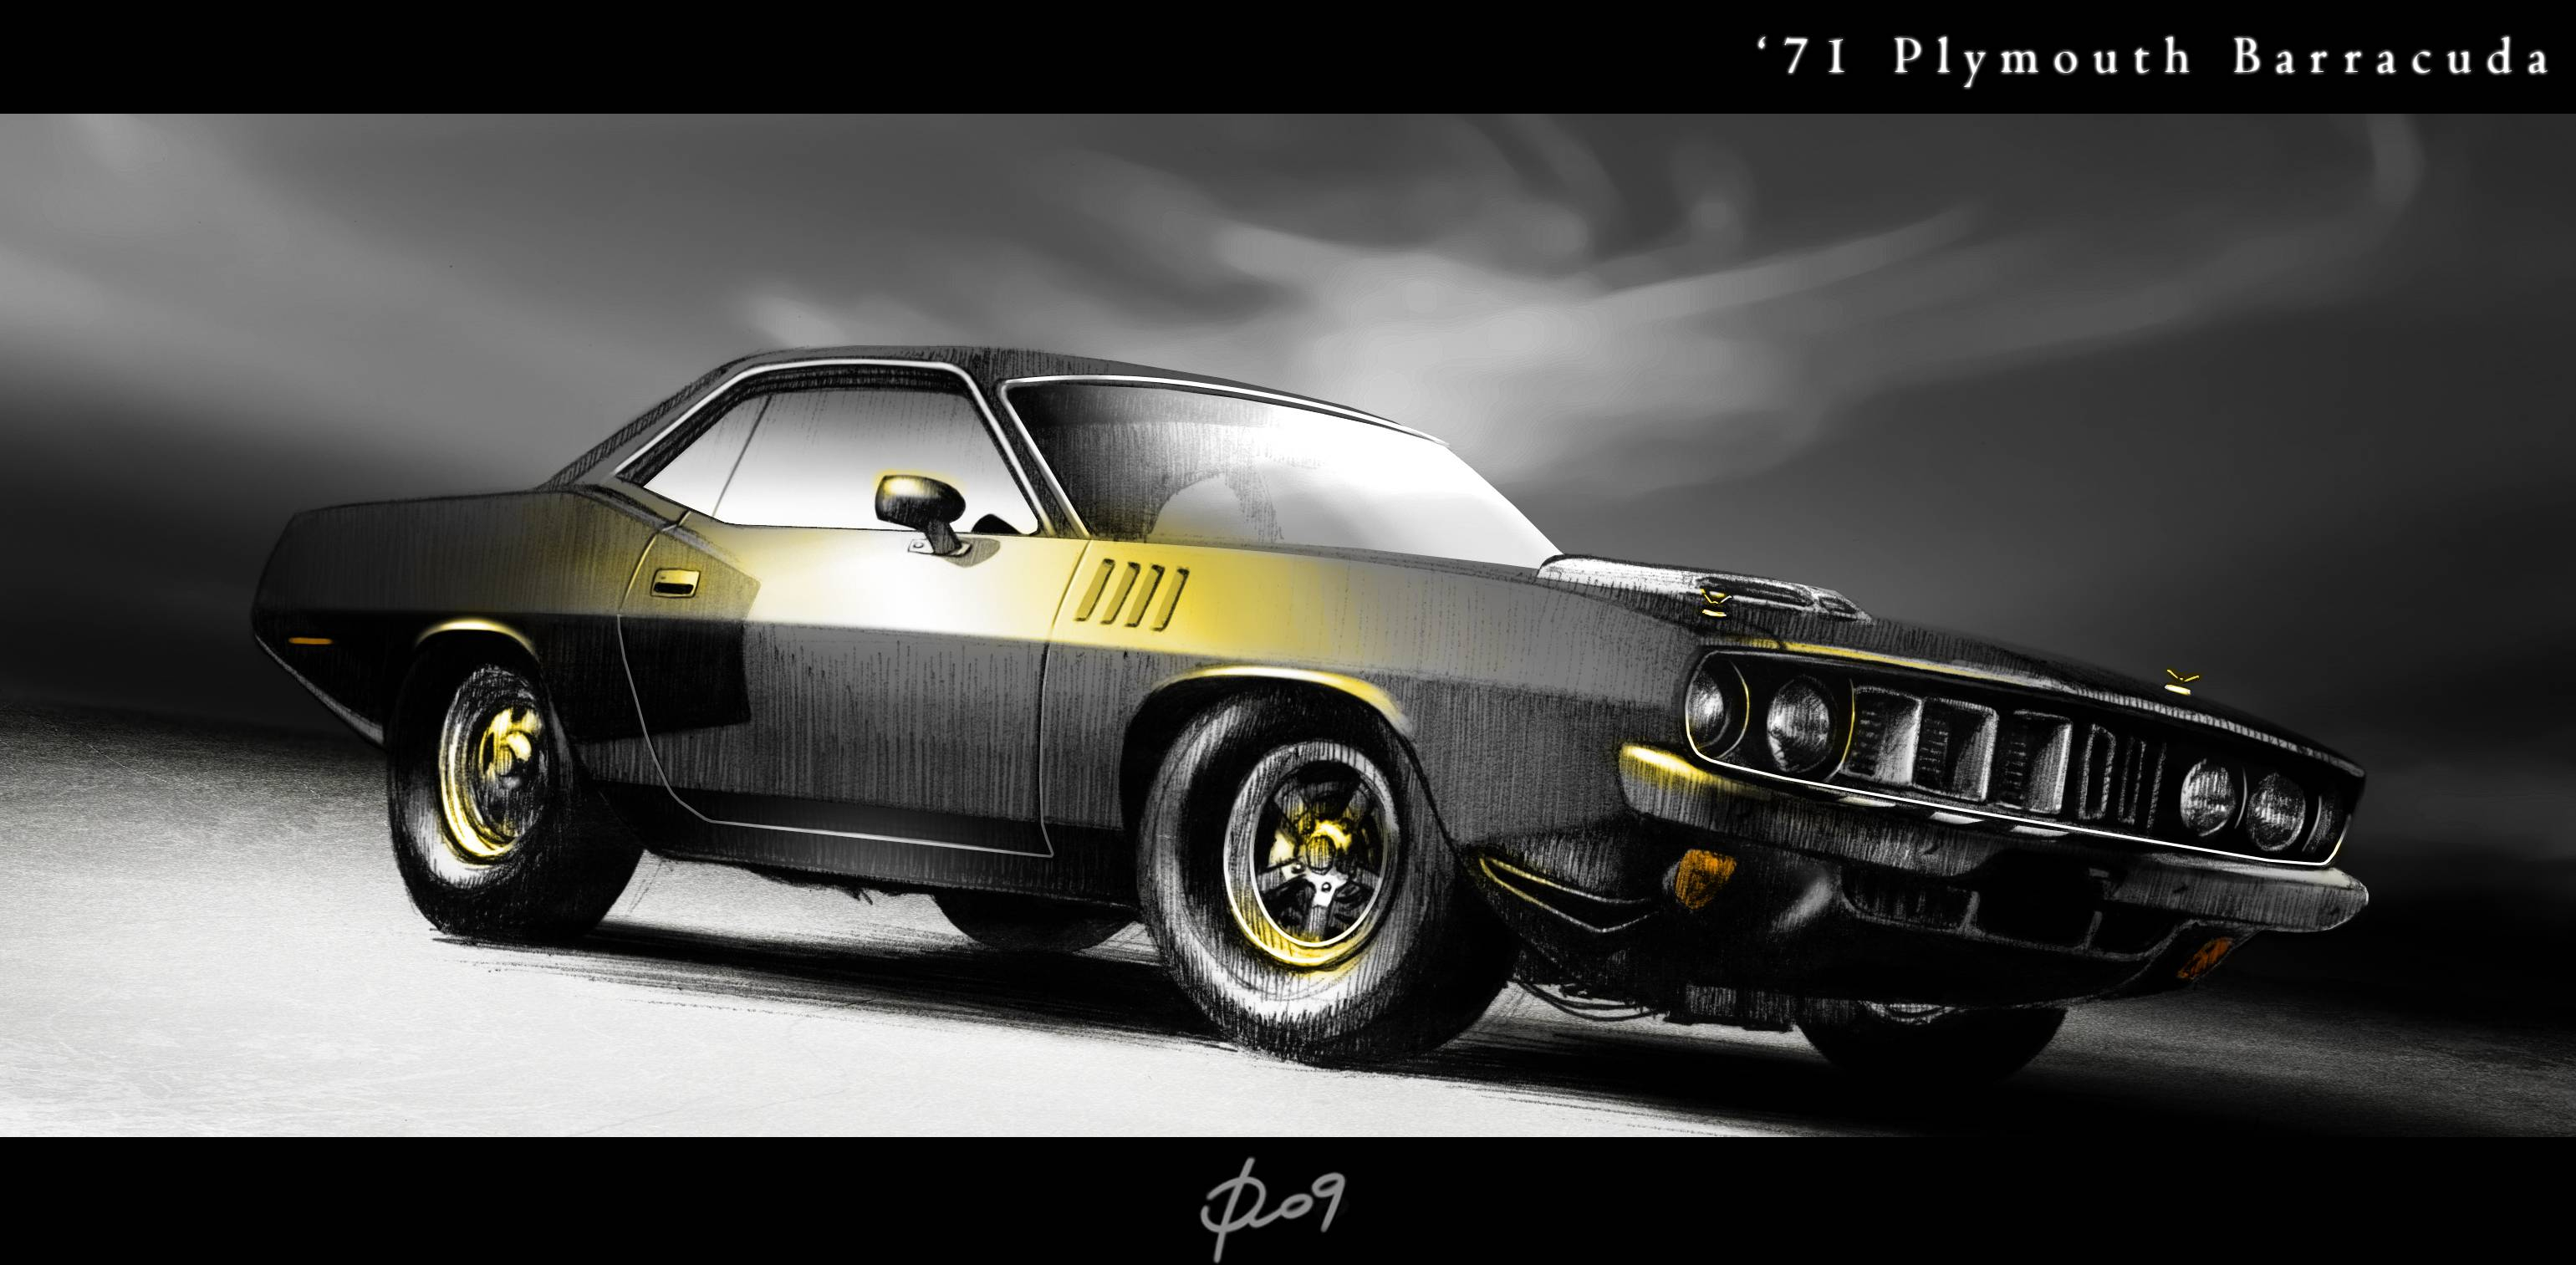 3081x1513 Plymouth Barracuda Wallpapers